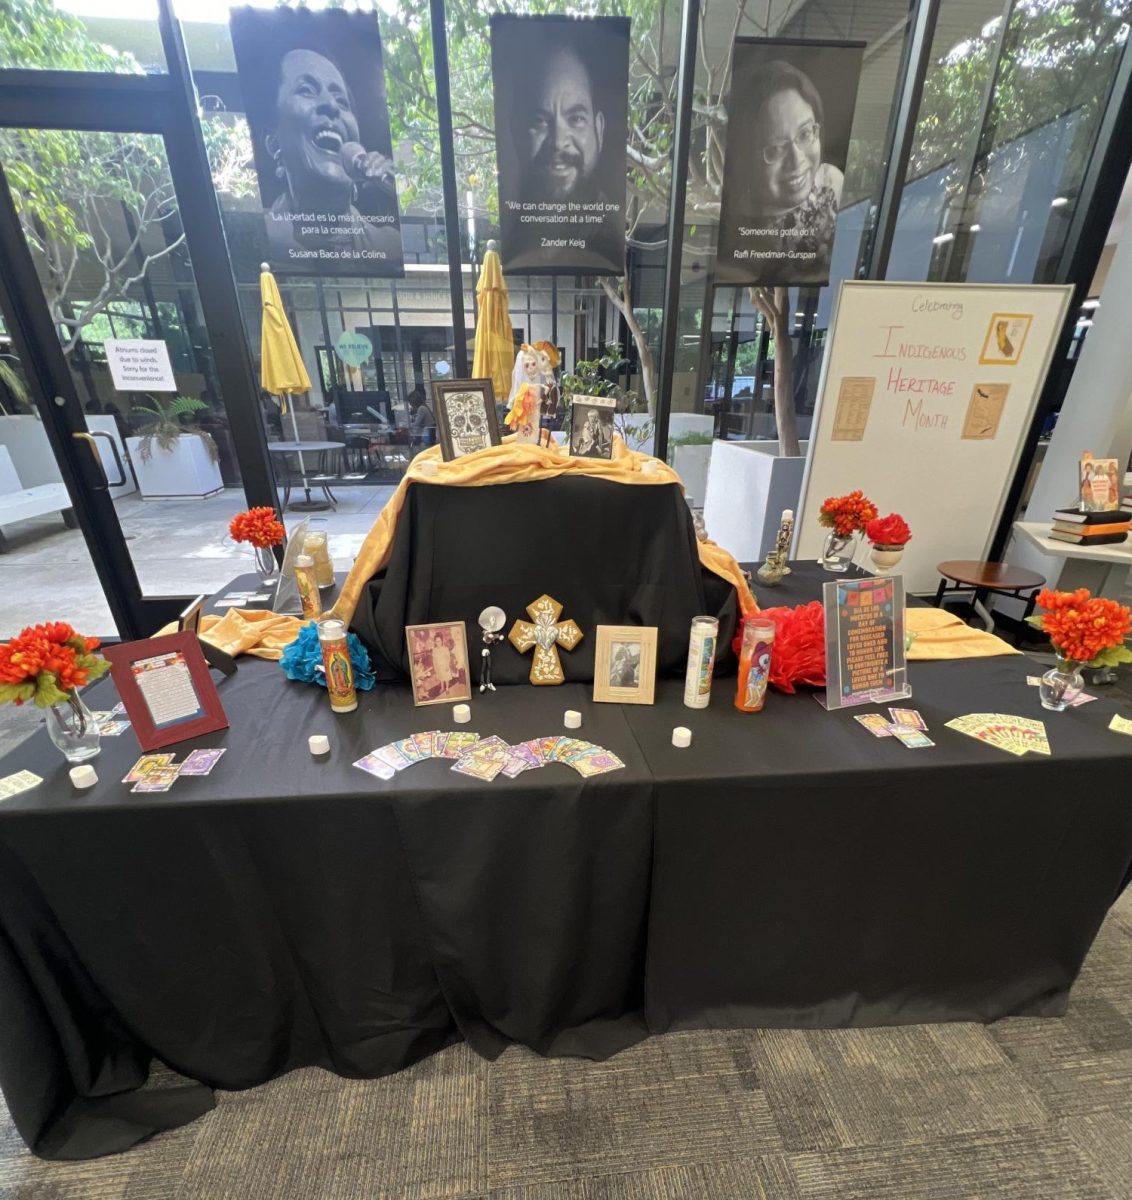 “It’s part of CLU’s mission in being a Hispanic-serving institution. It makes sense to recognize that other people and other cultures have different ways of honoring people,” Librarian for Reference and Outreach Erin Sommers said.